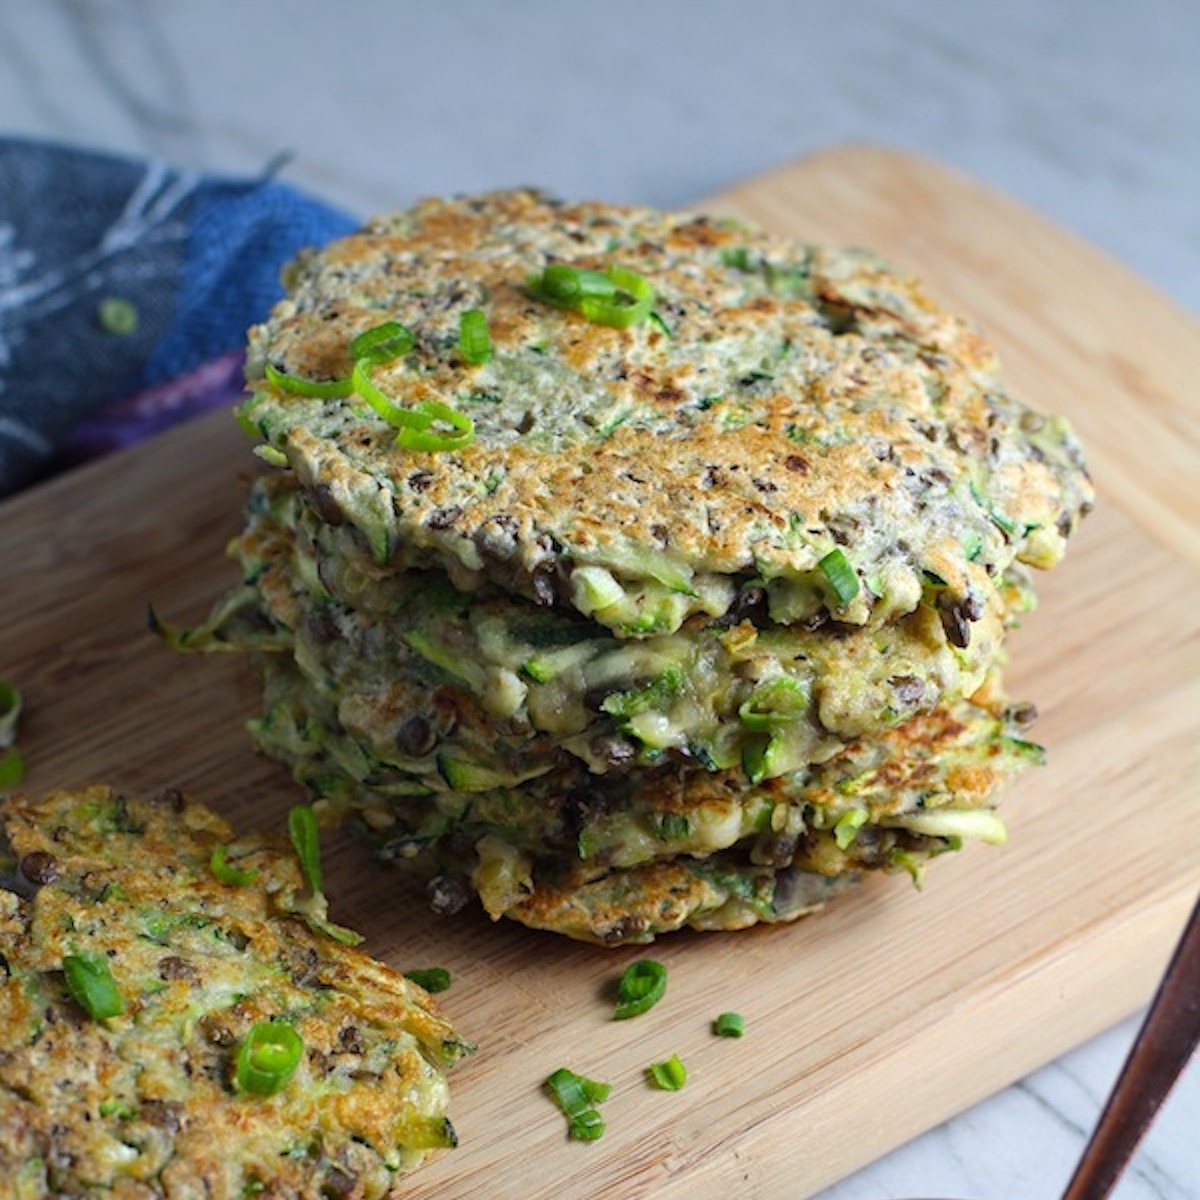 Zucchini Lentil Fritters stacked on wood cutting board. They have a crispy outside and soft inside and are perfect for an easy dinner!  The flavors are simple but perfect with parmesan, oregano, scallions, lentils, and zucchini.